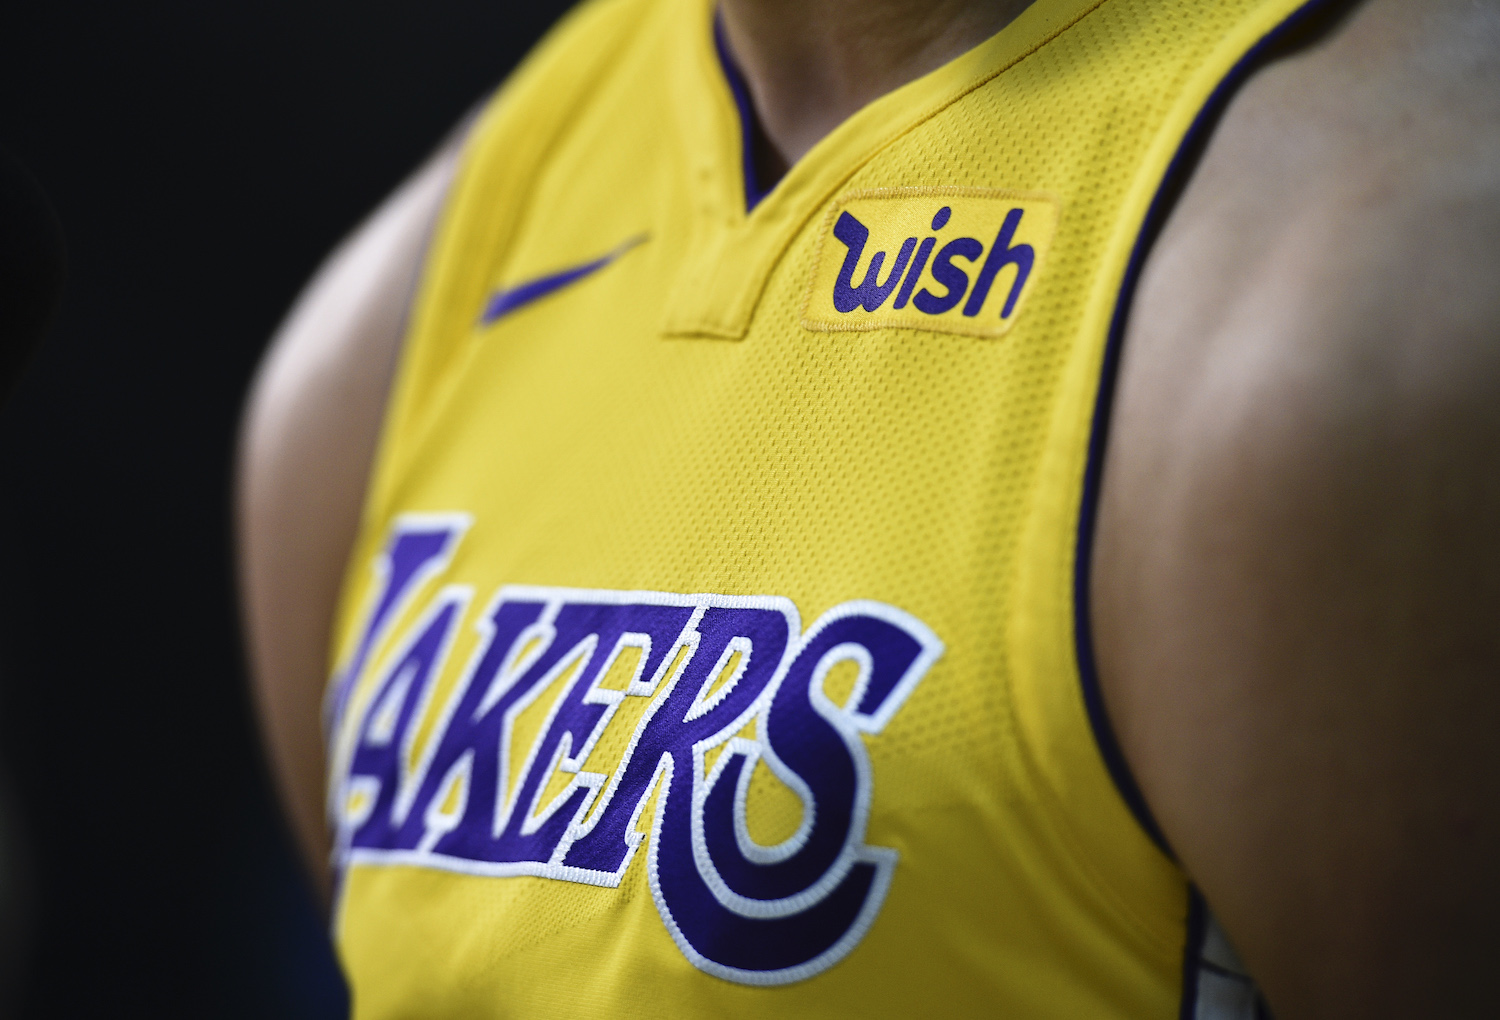 Los Angeles Lakers jersey features Wish logo